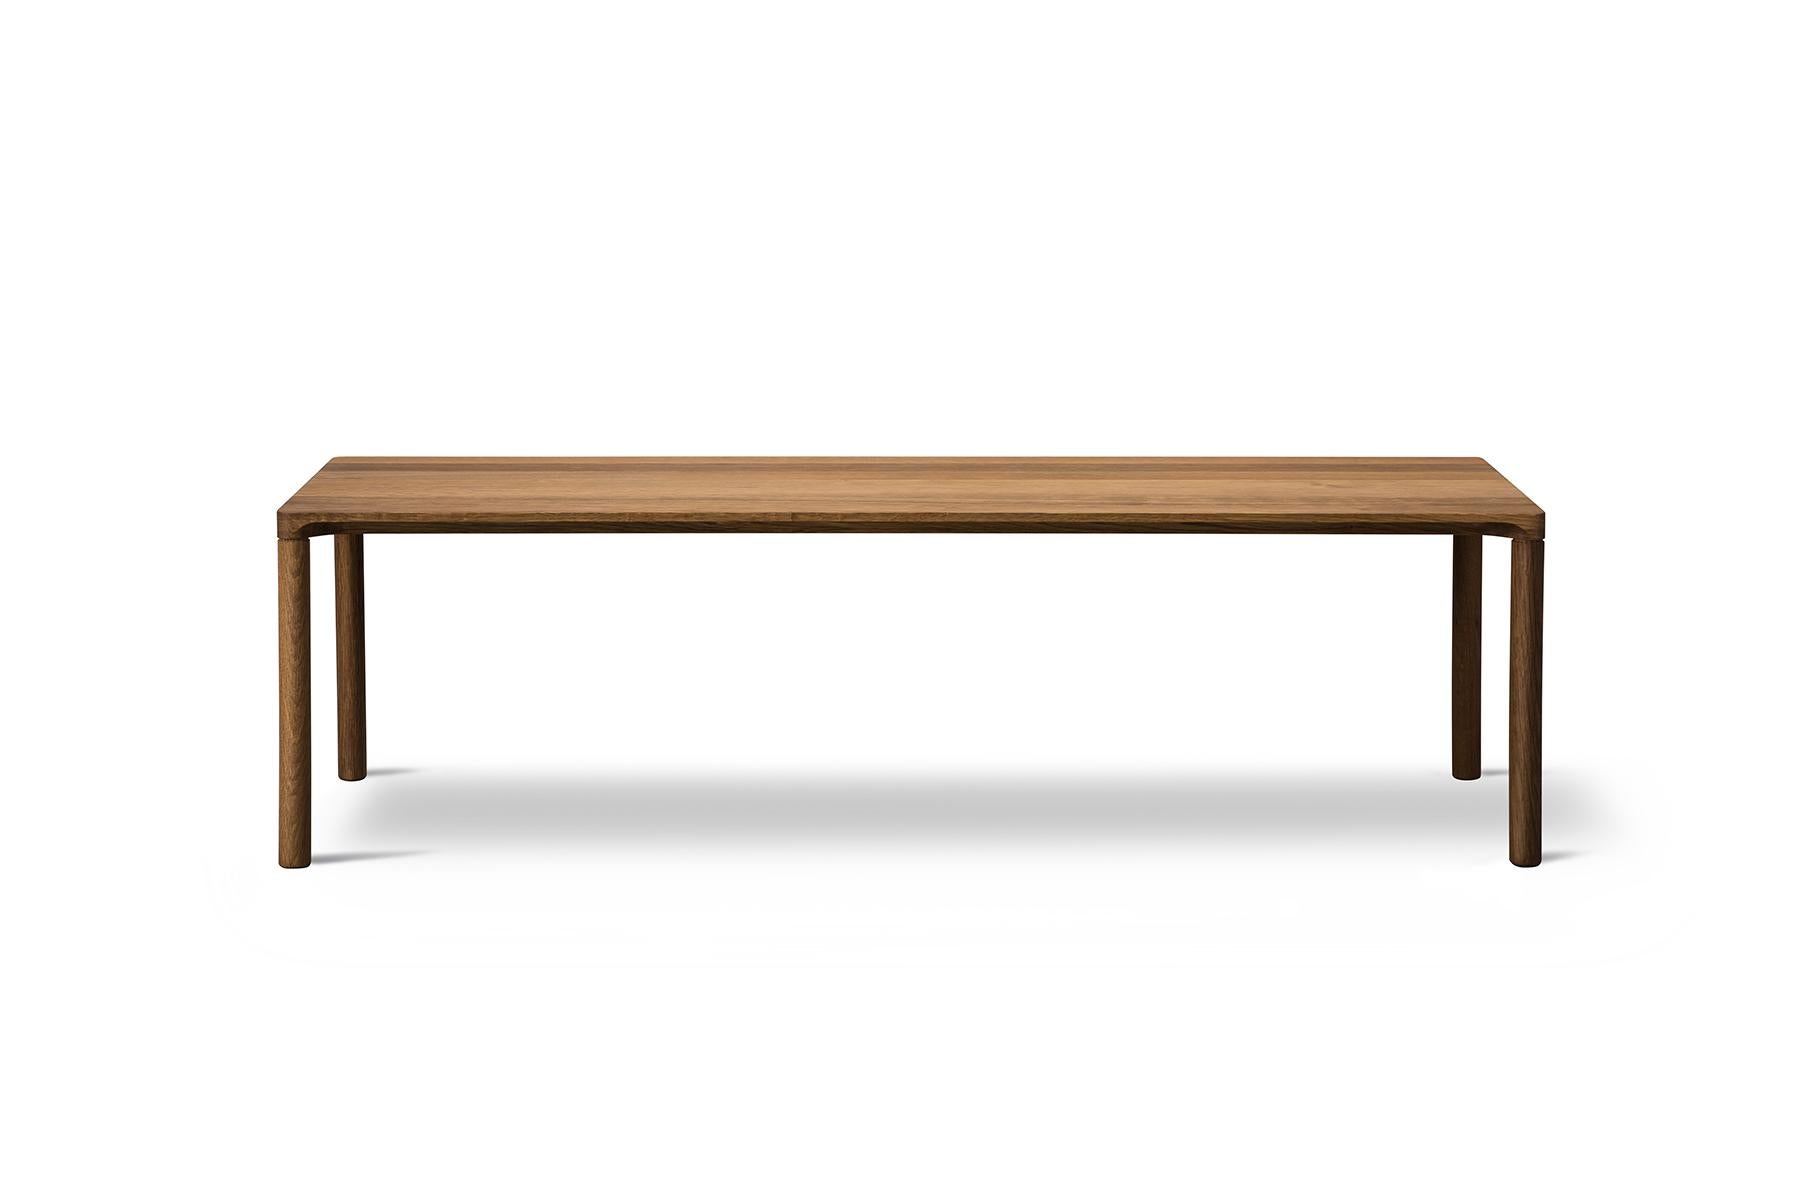 Hugo Passos Piloti table – Extra large is a series of solid oak side tables. The subtle detailing of the table top creates the impression of a single line, floating between four delicate legs. The tables are supplied in two heights and can be